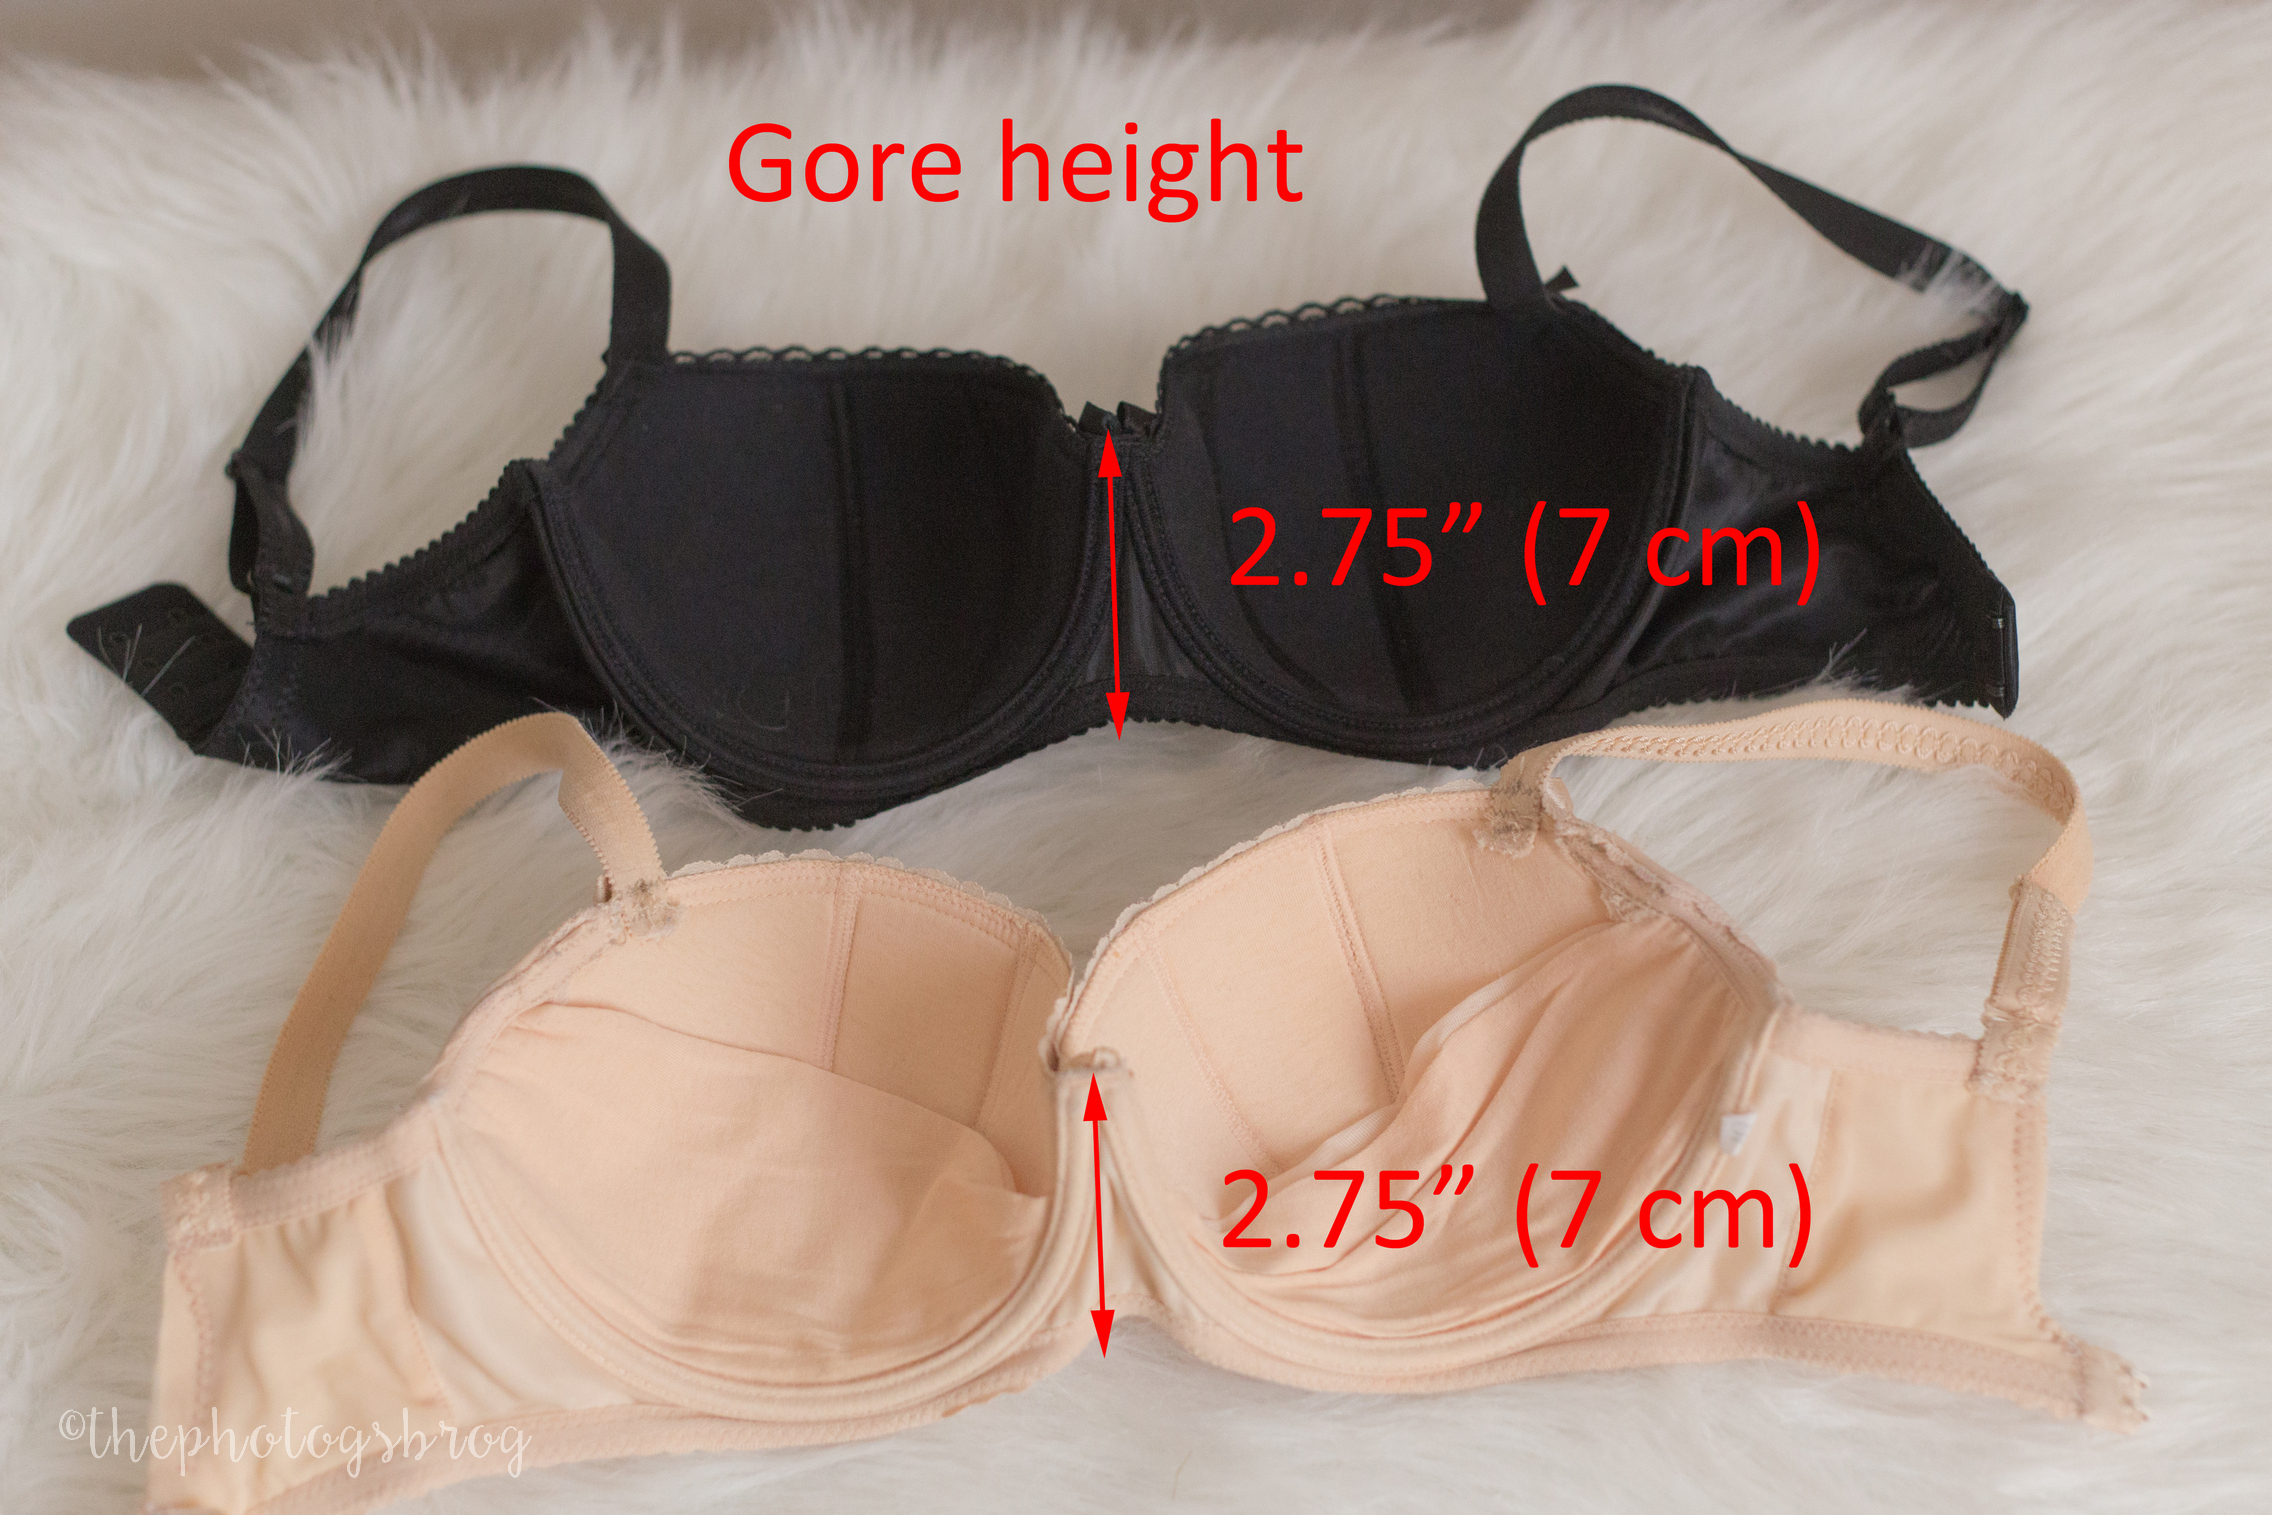 How does havong shallow breasts affect sizing? : r/ABraThatFits